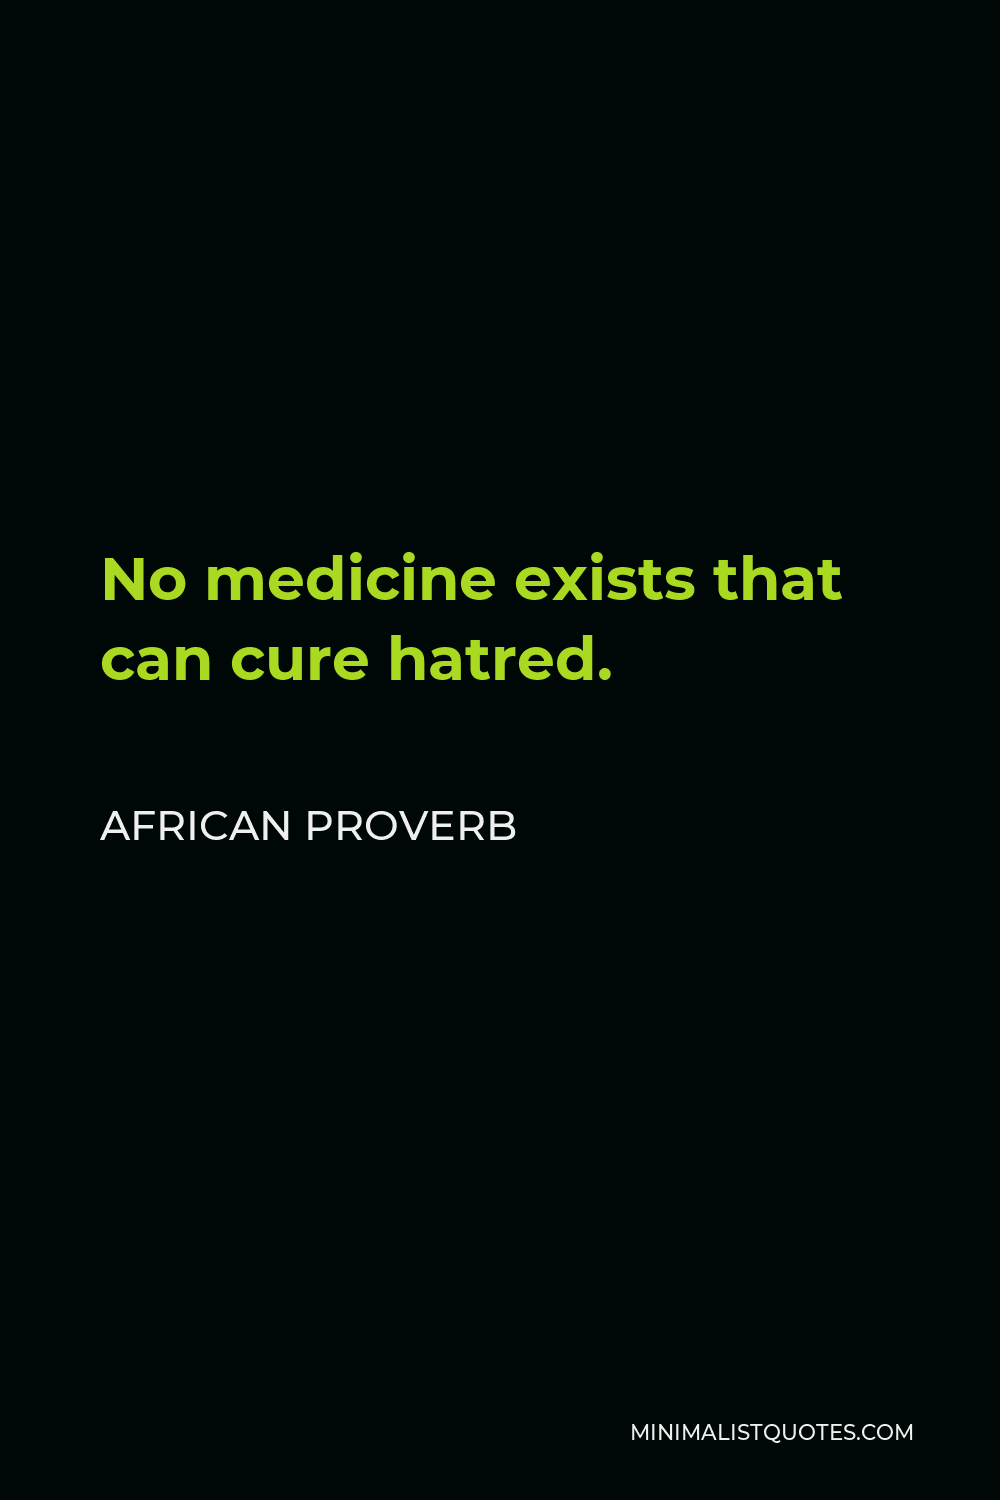 African Proverb Quote - No medicine exists that can cure hatred.